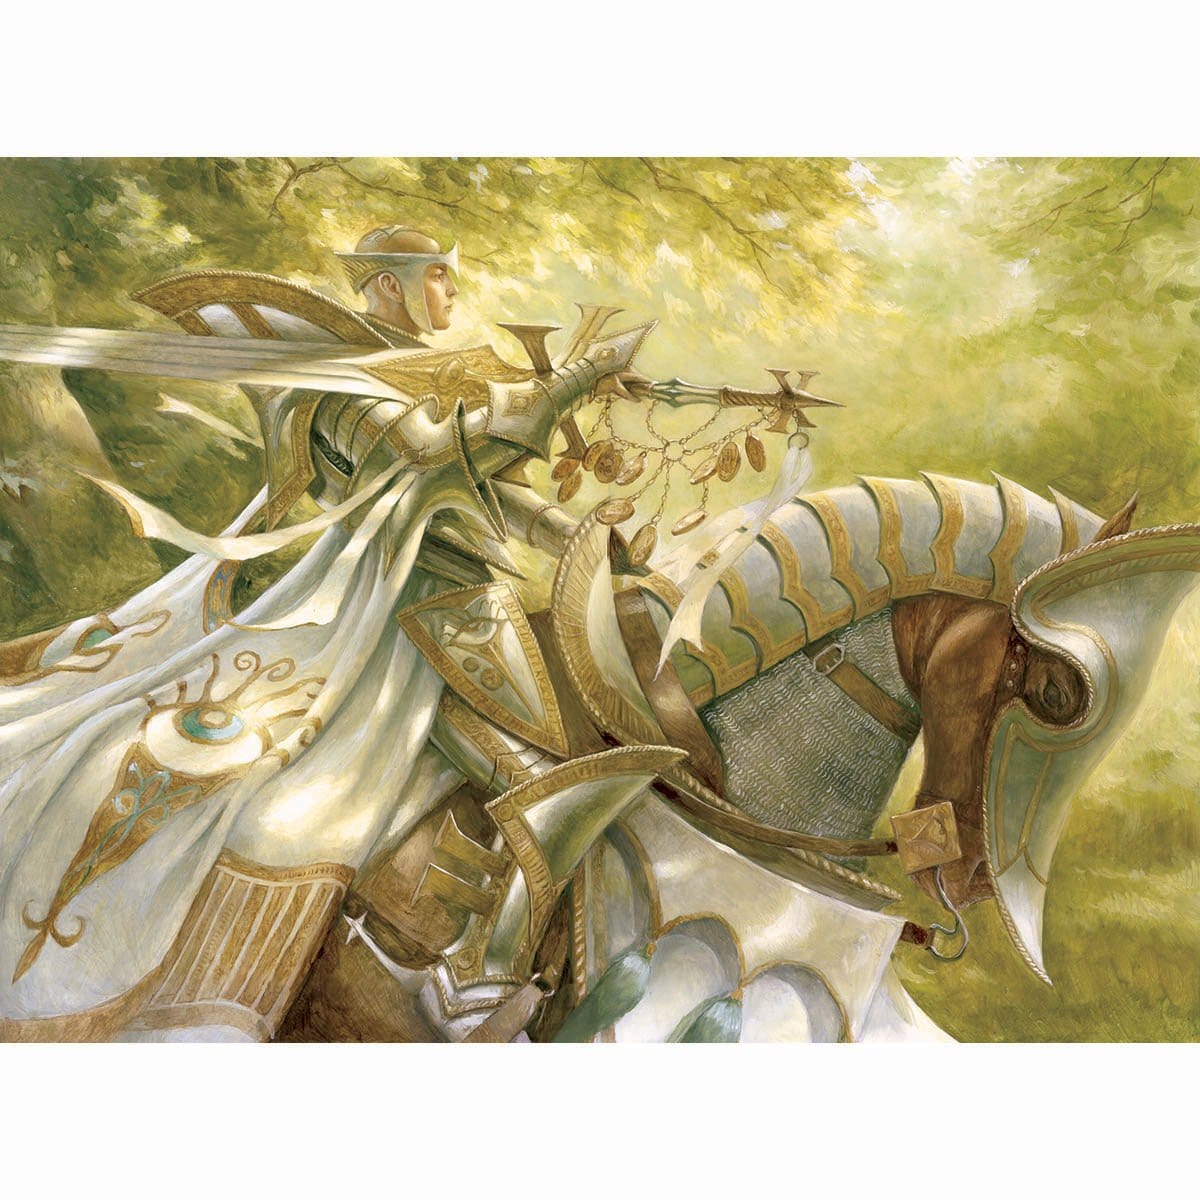 Knight of the Skyward Eye Print - Print - Original Magic Art - Accessories for Magic the Gathering and other card games